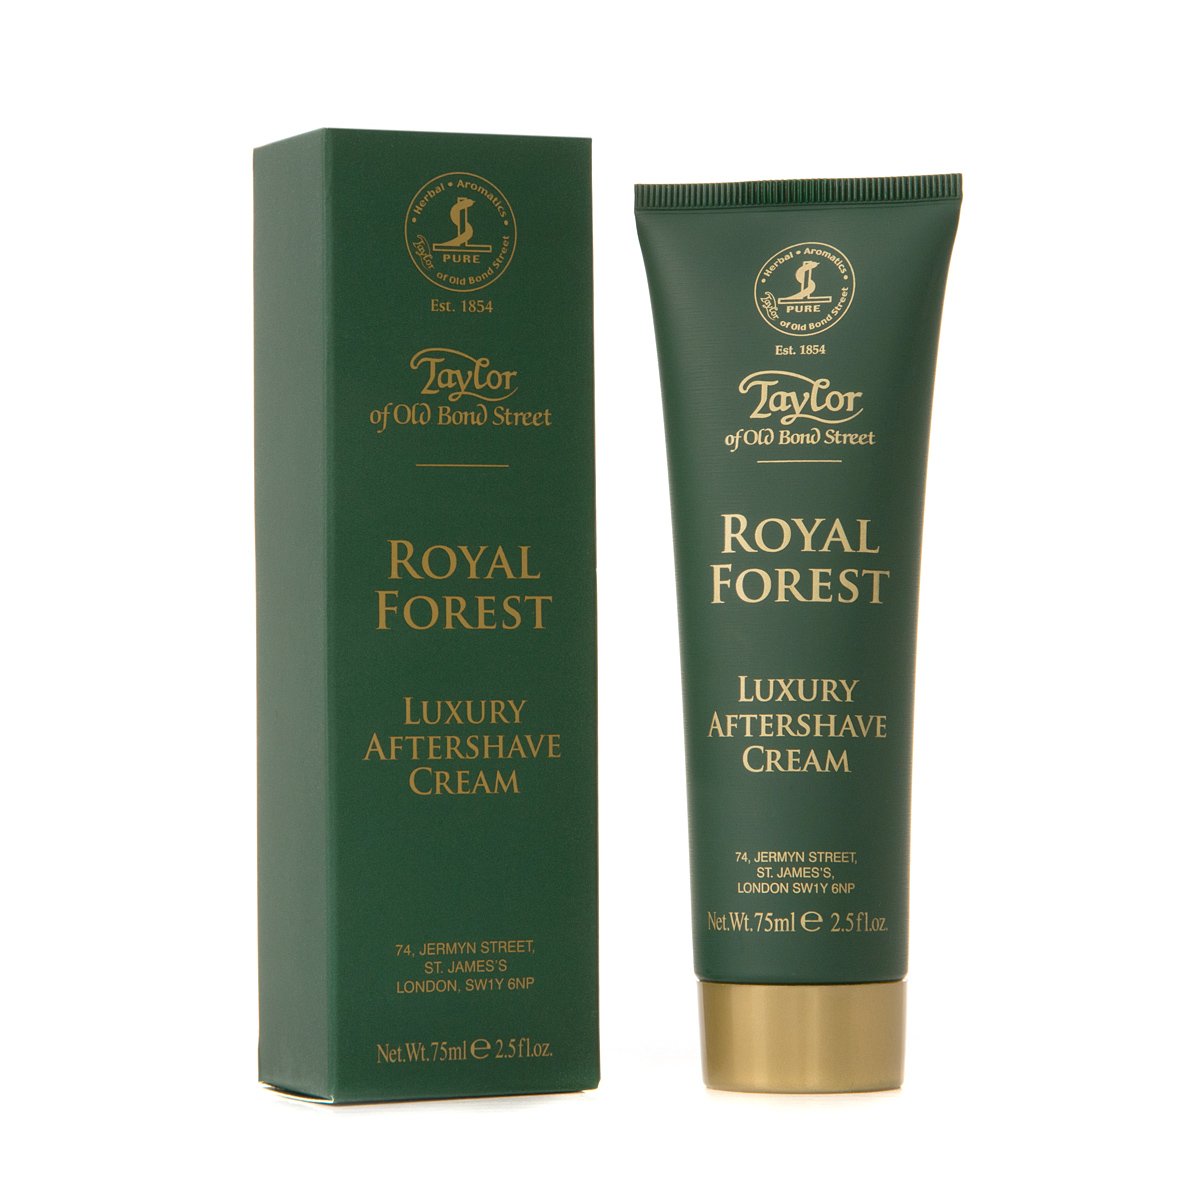 Taylor of Old Bond Street Royal Forest Aftershave Cream 75ml